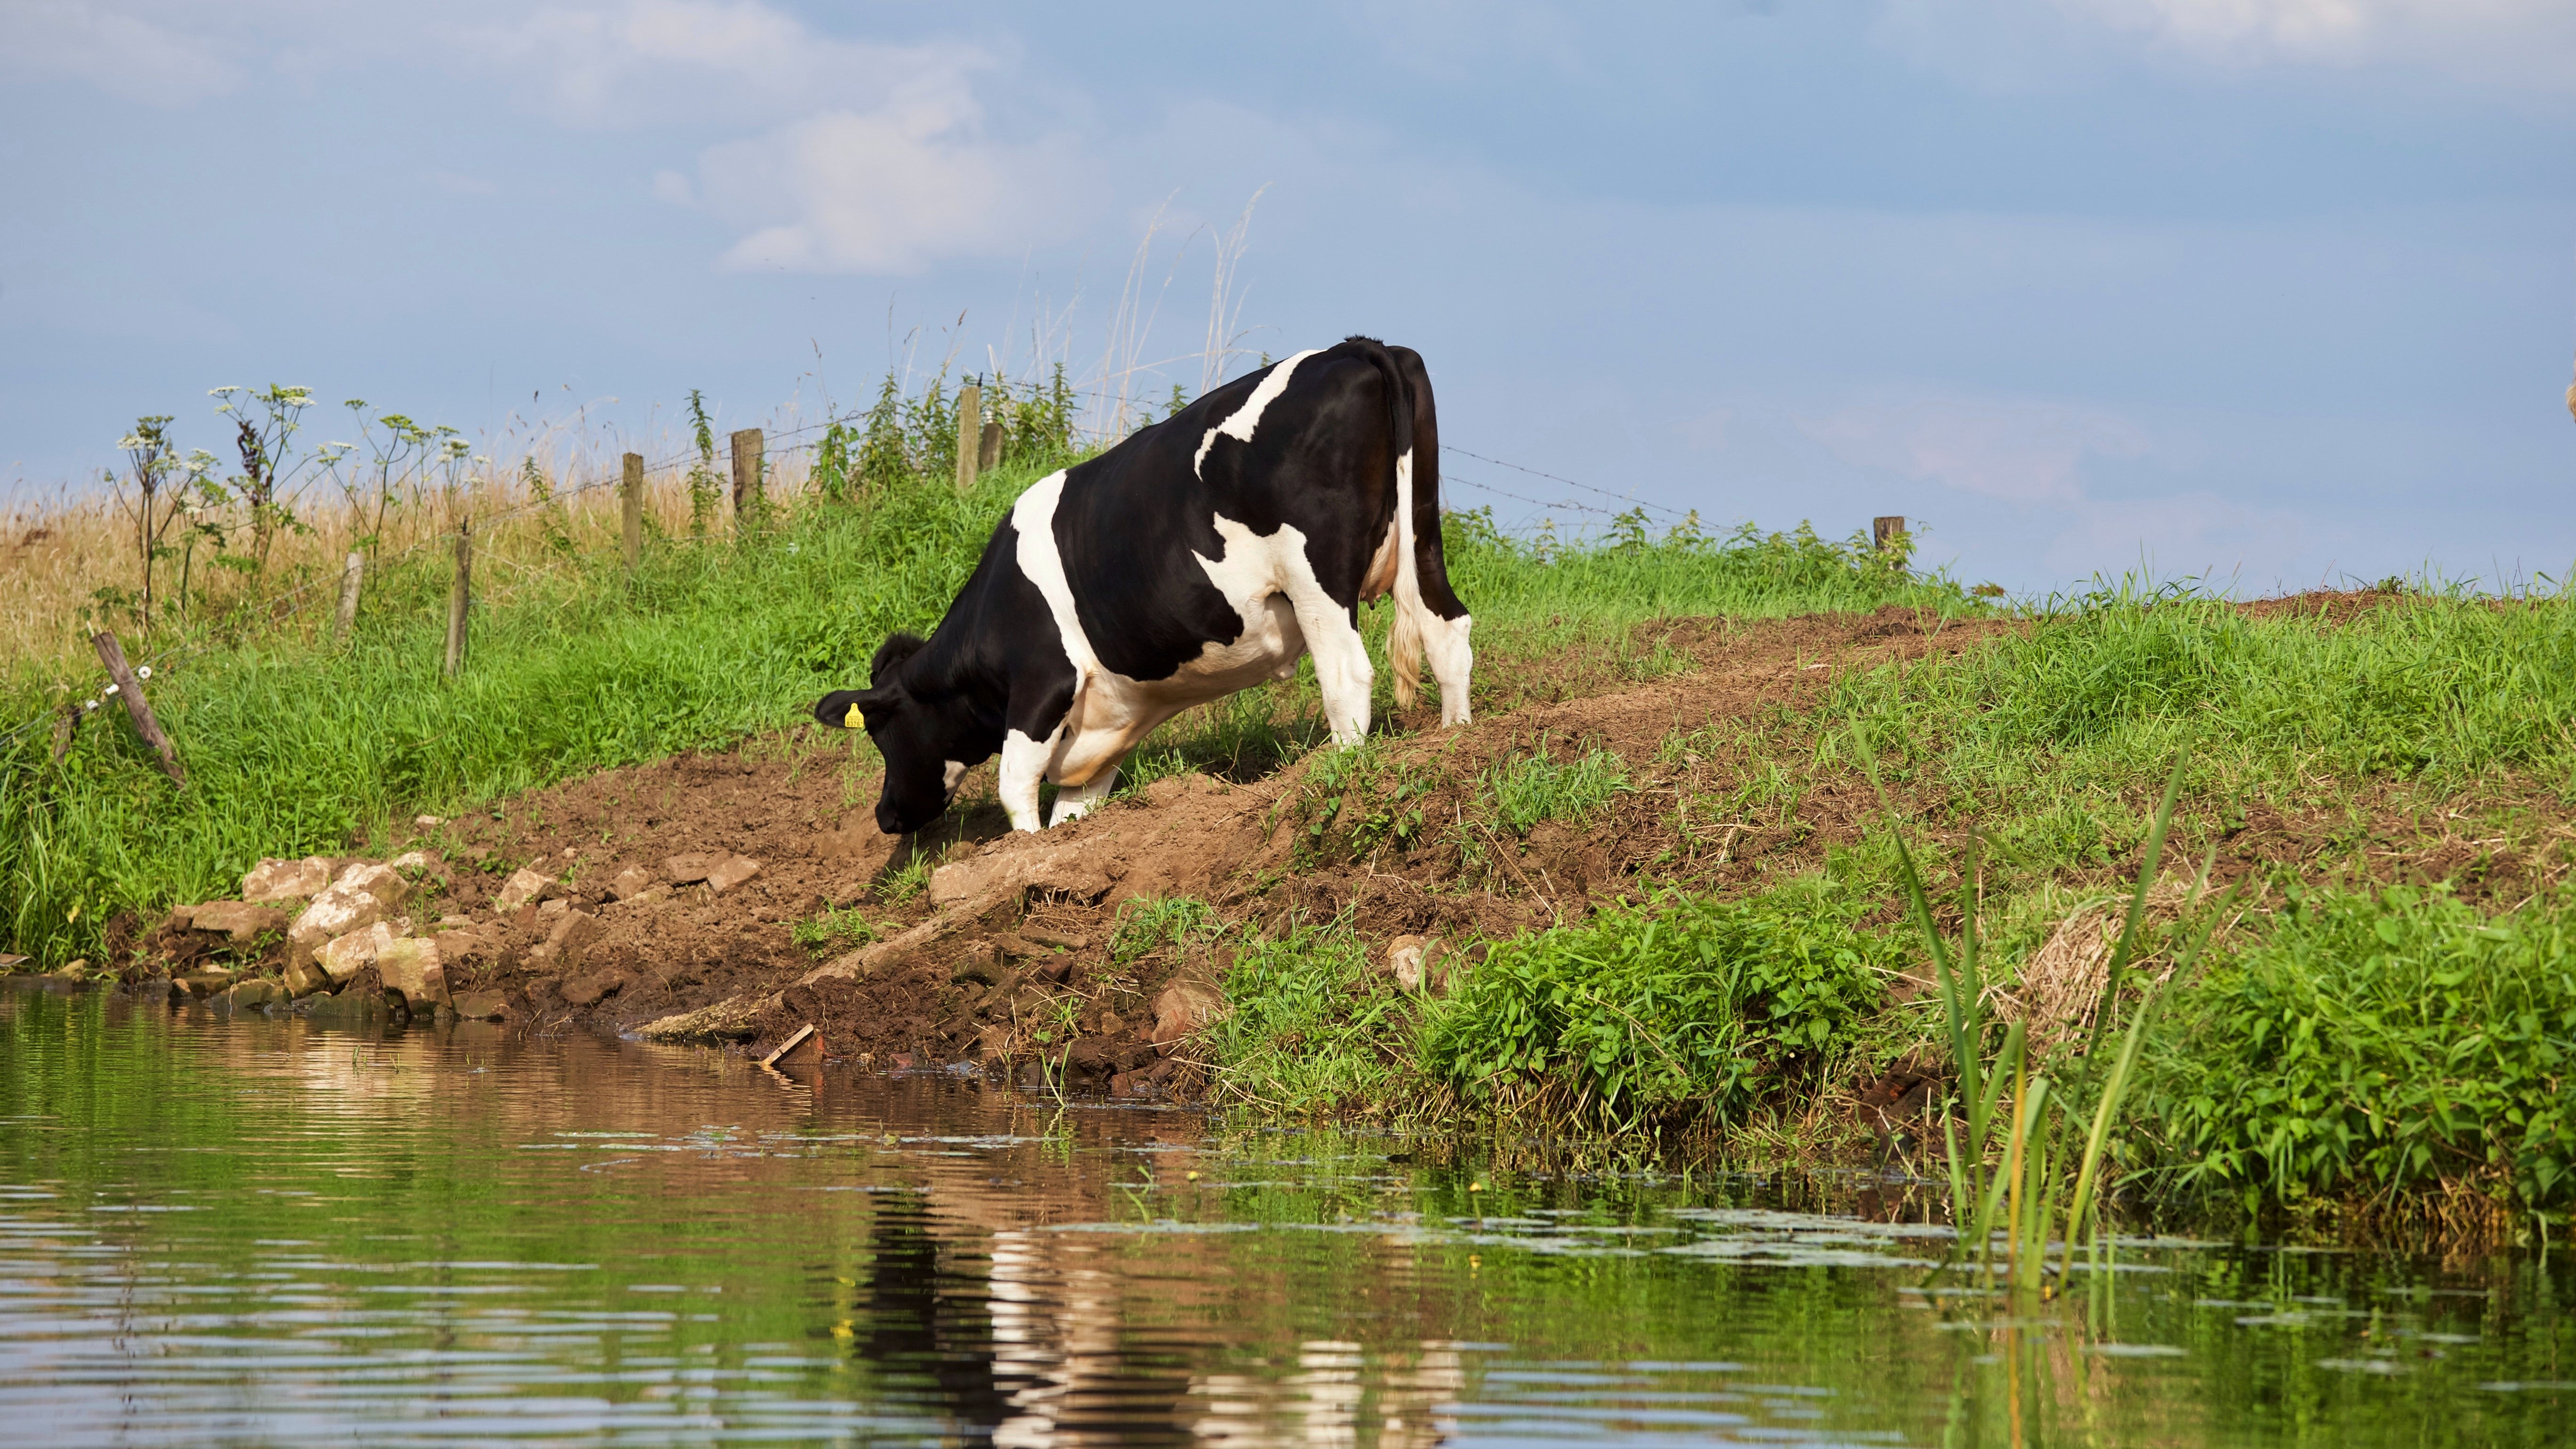 Cow Eating Grass Near Body of Water · Free